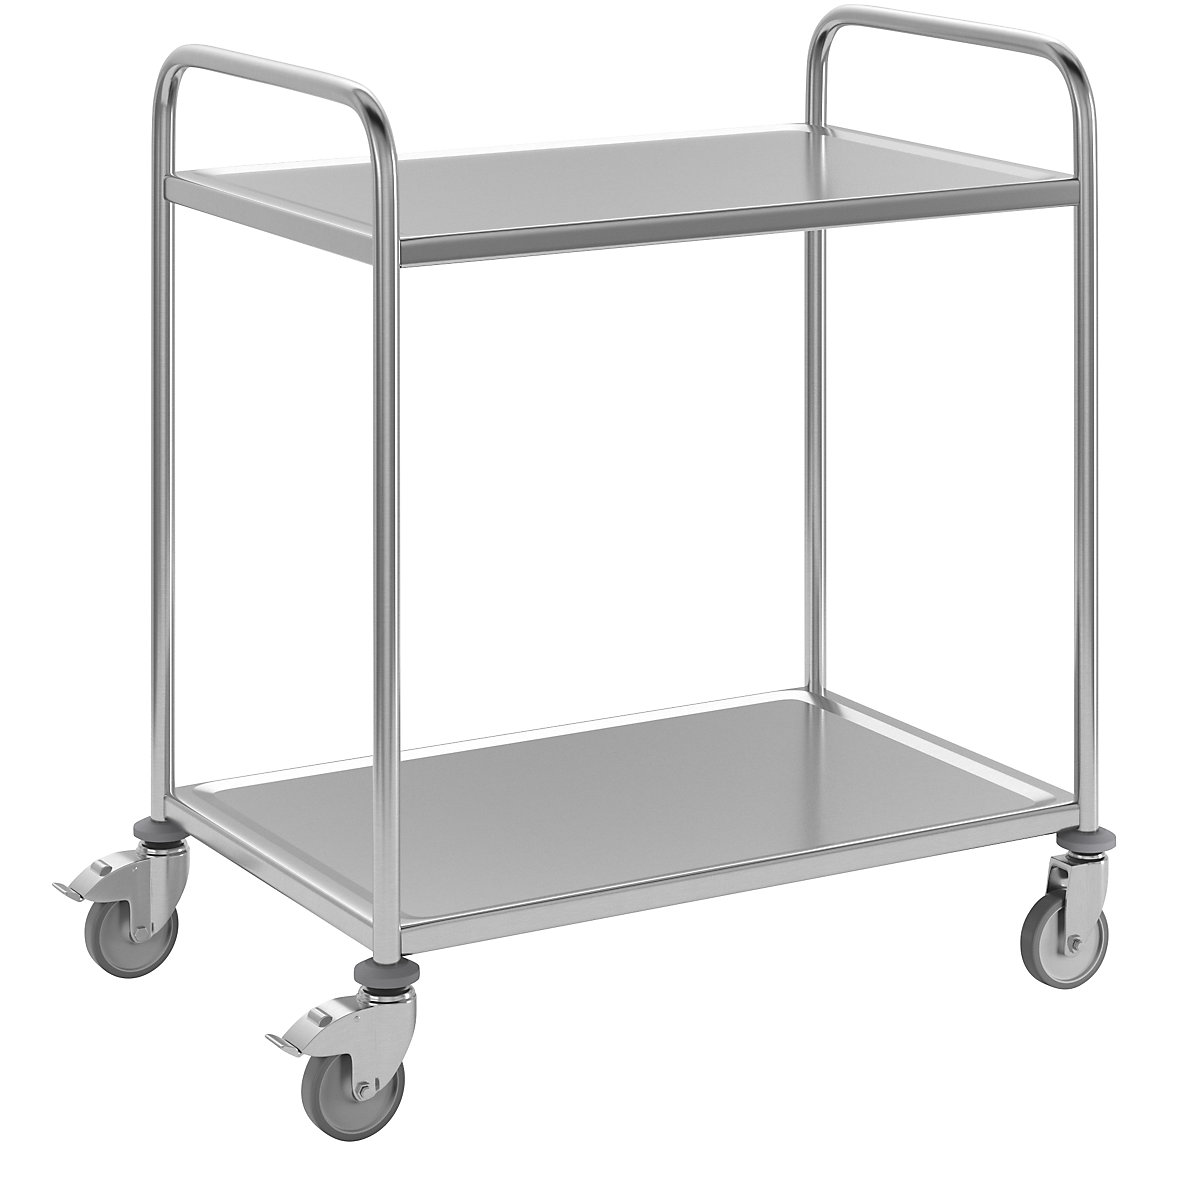 Stainless steel serving trolley, 2 shelves, zinc plated castor, rubber tyres, LxWxH 870 x 570 x 970 mm-4